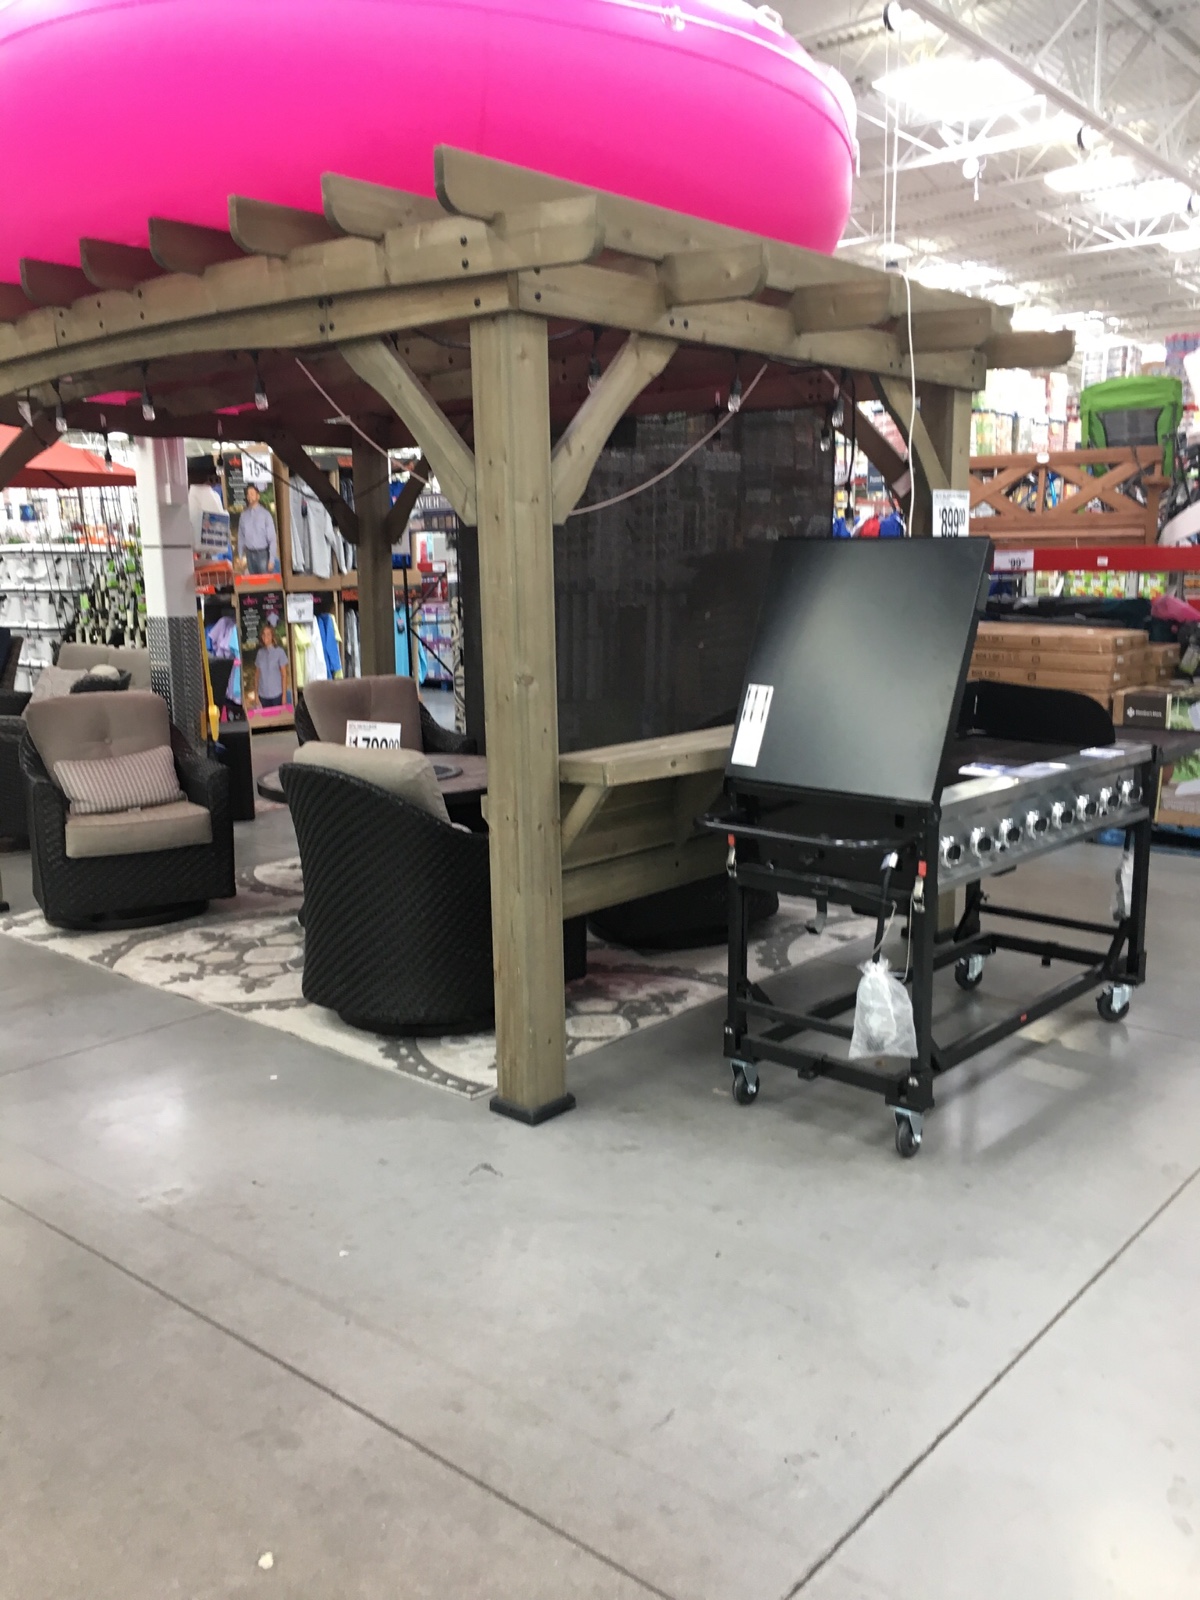 My husband and I were thinking about buying this pergola kit fro